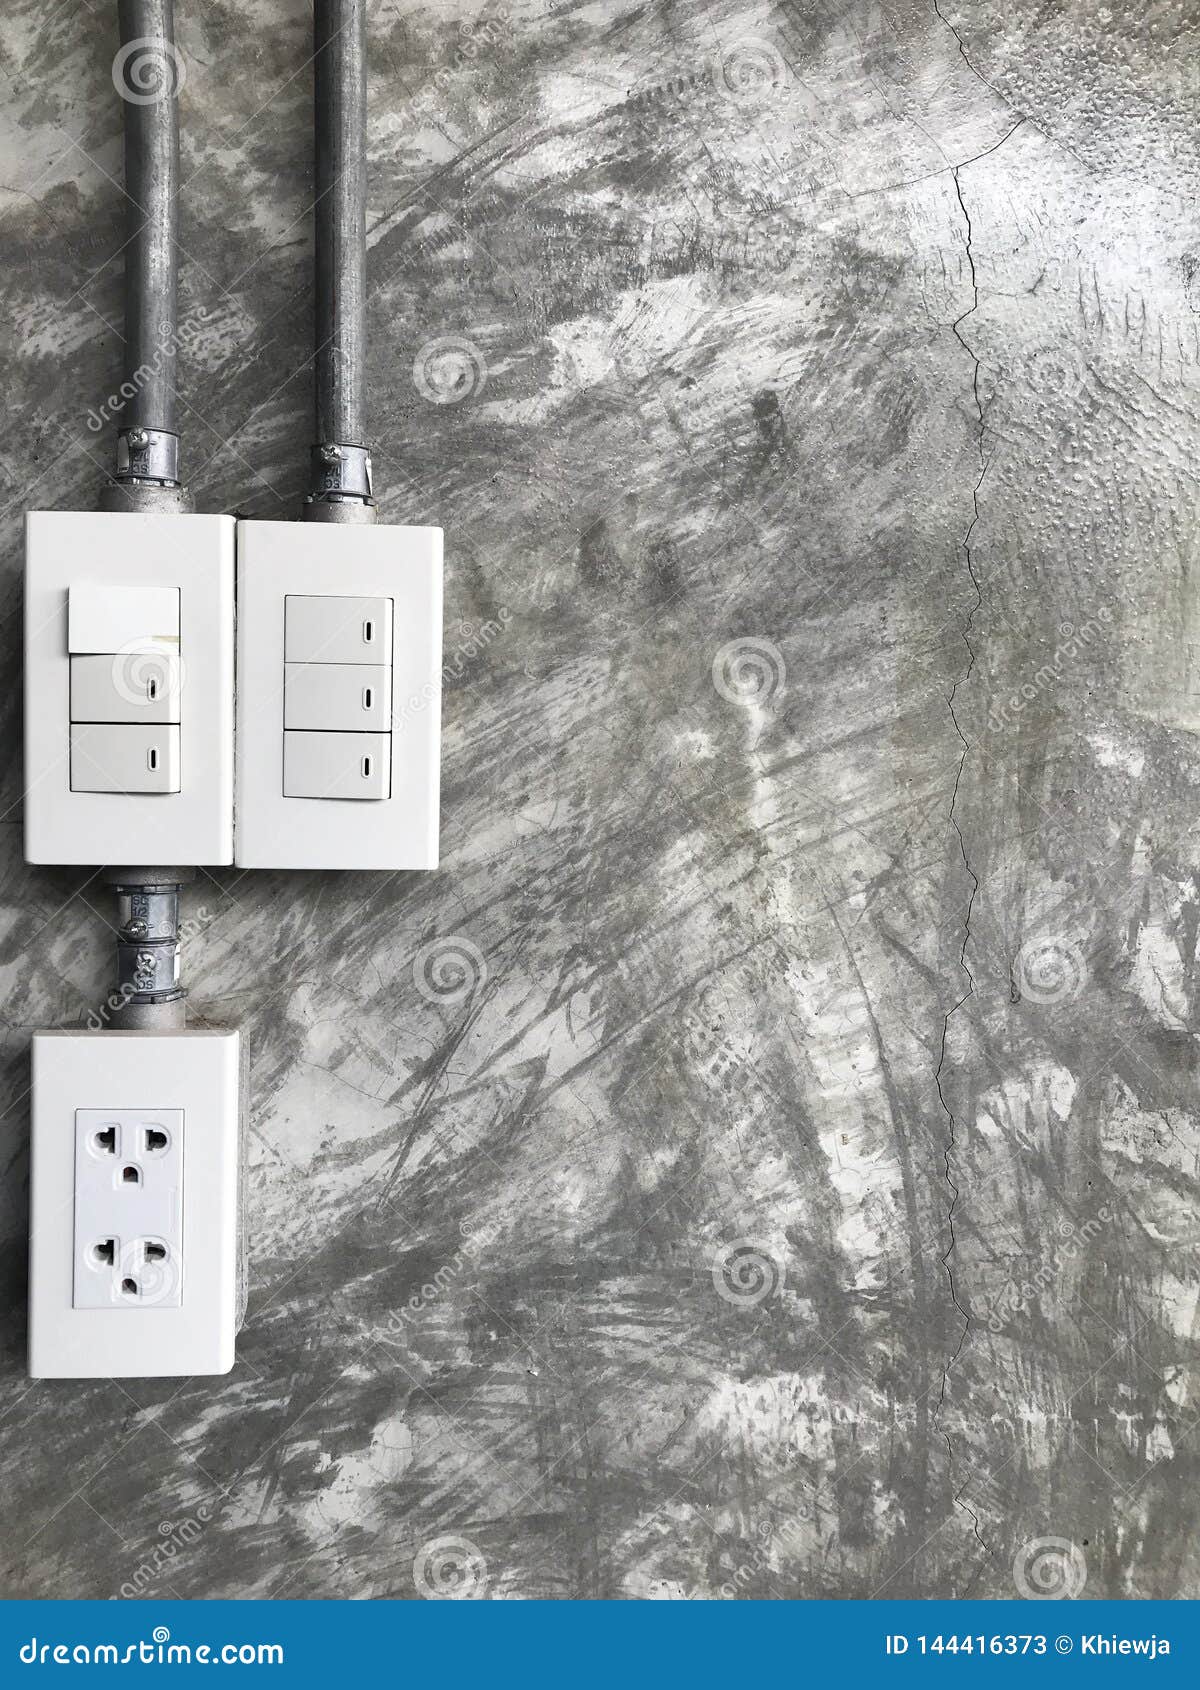 Plug The Power Outlet And The Power Switch On The Cement Wall Stock Image Image Of Plate Concept 144416373